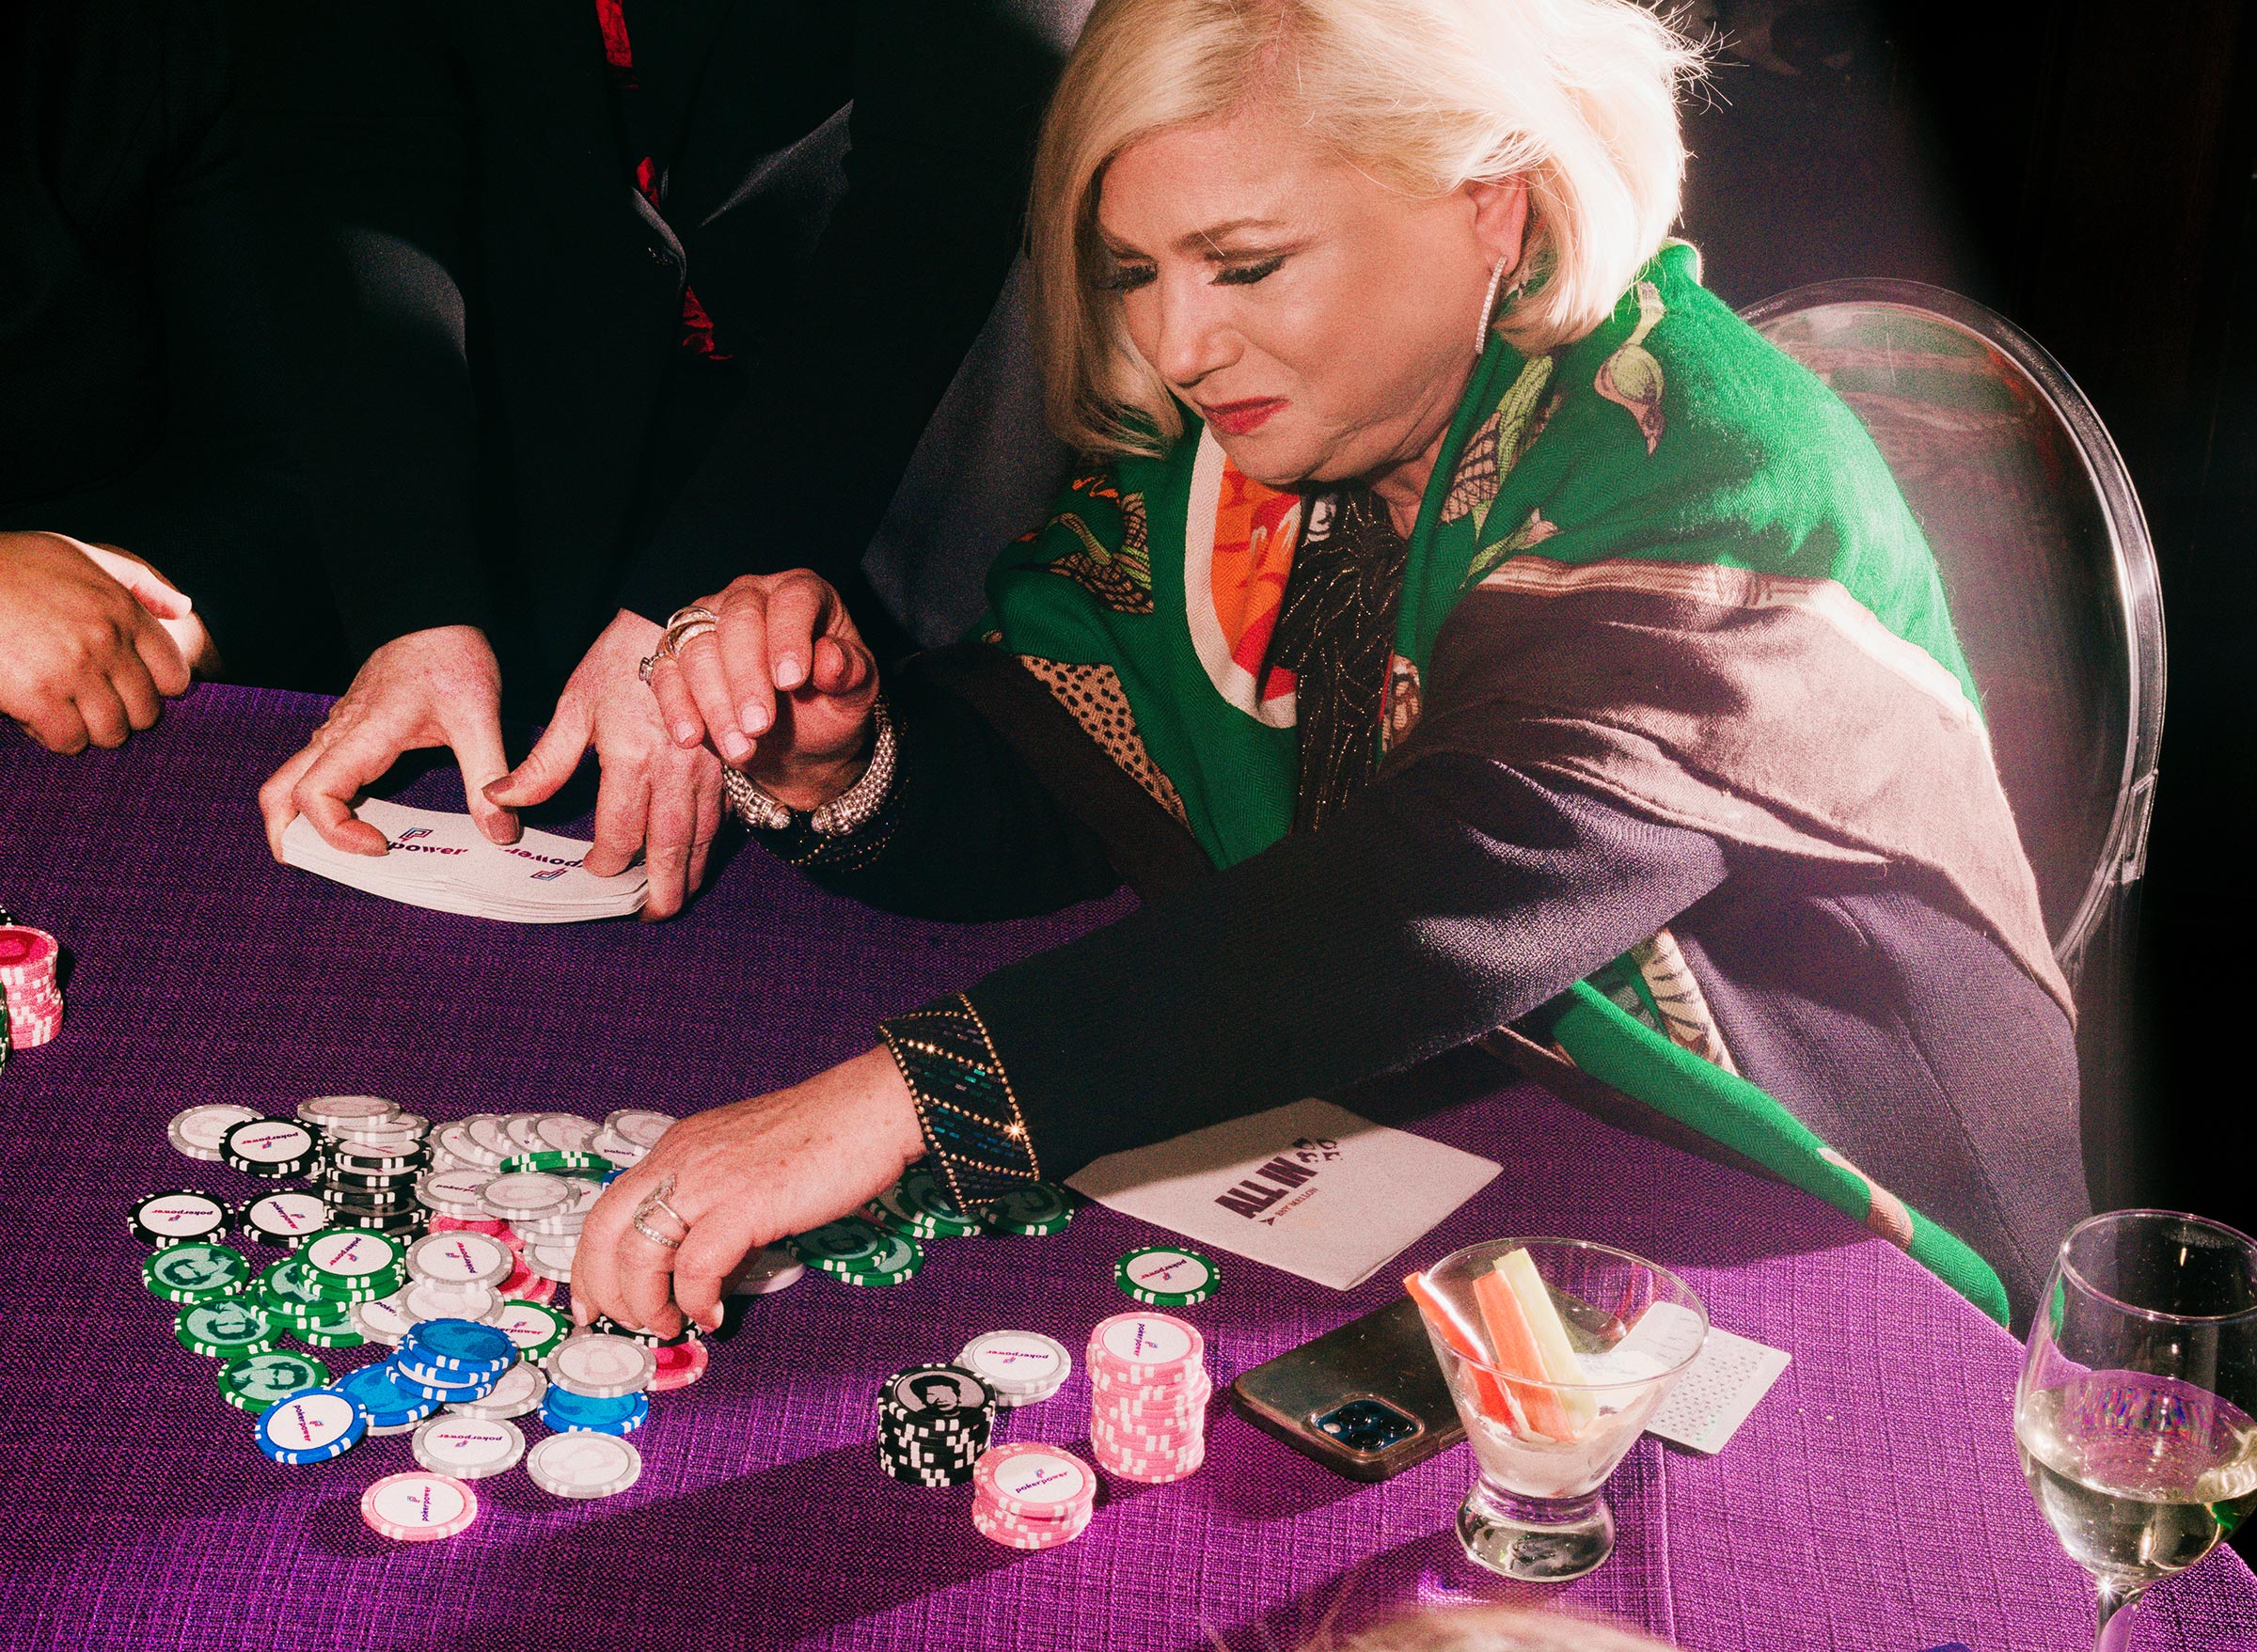 “The forcefield that's around the poker table,” says Just, makes it hard for women “just to go sit in the goddamn seat.” (Tonje Thilesen for TIME)